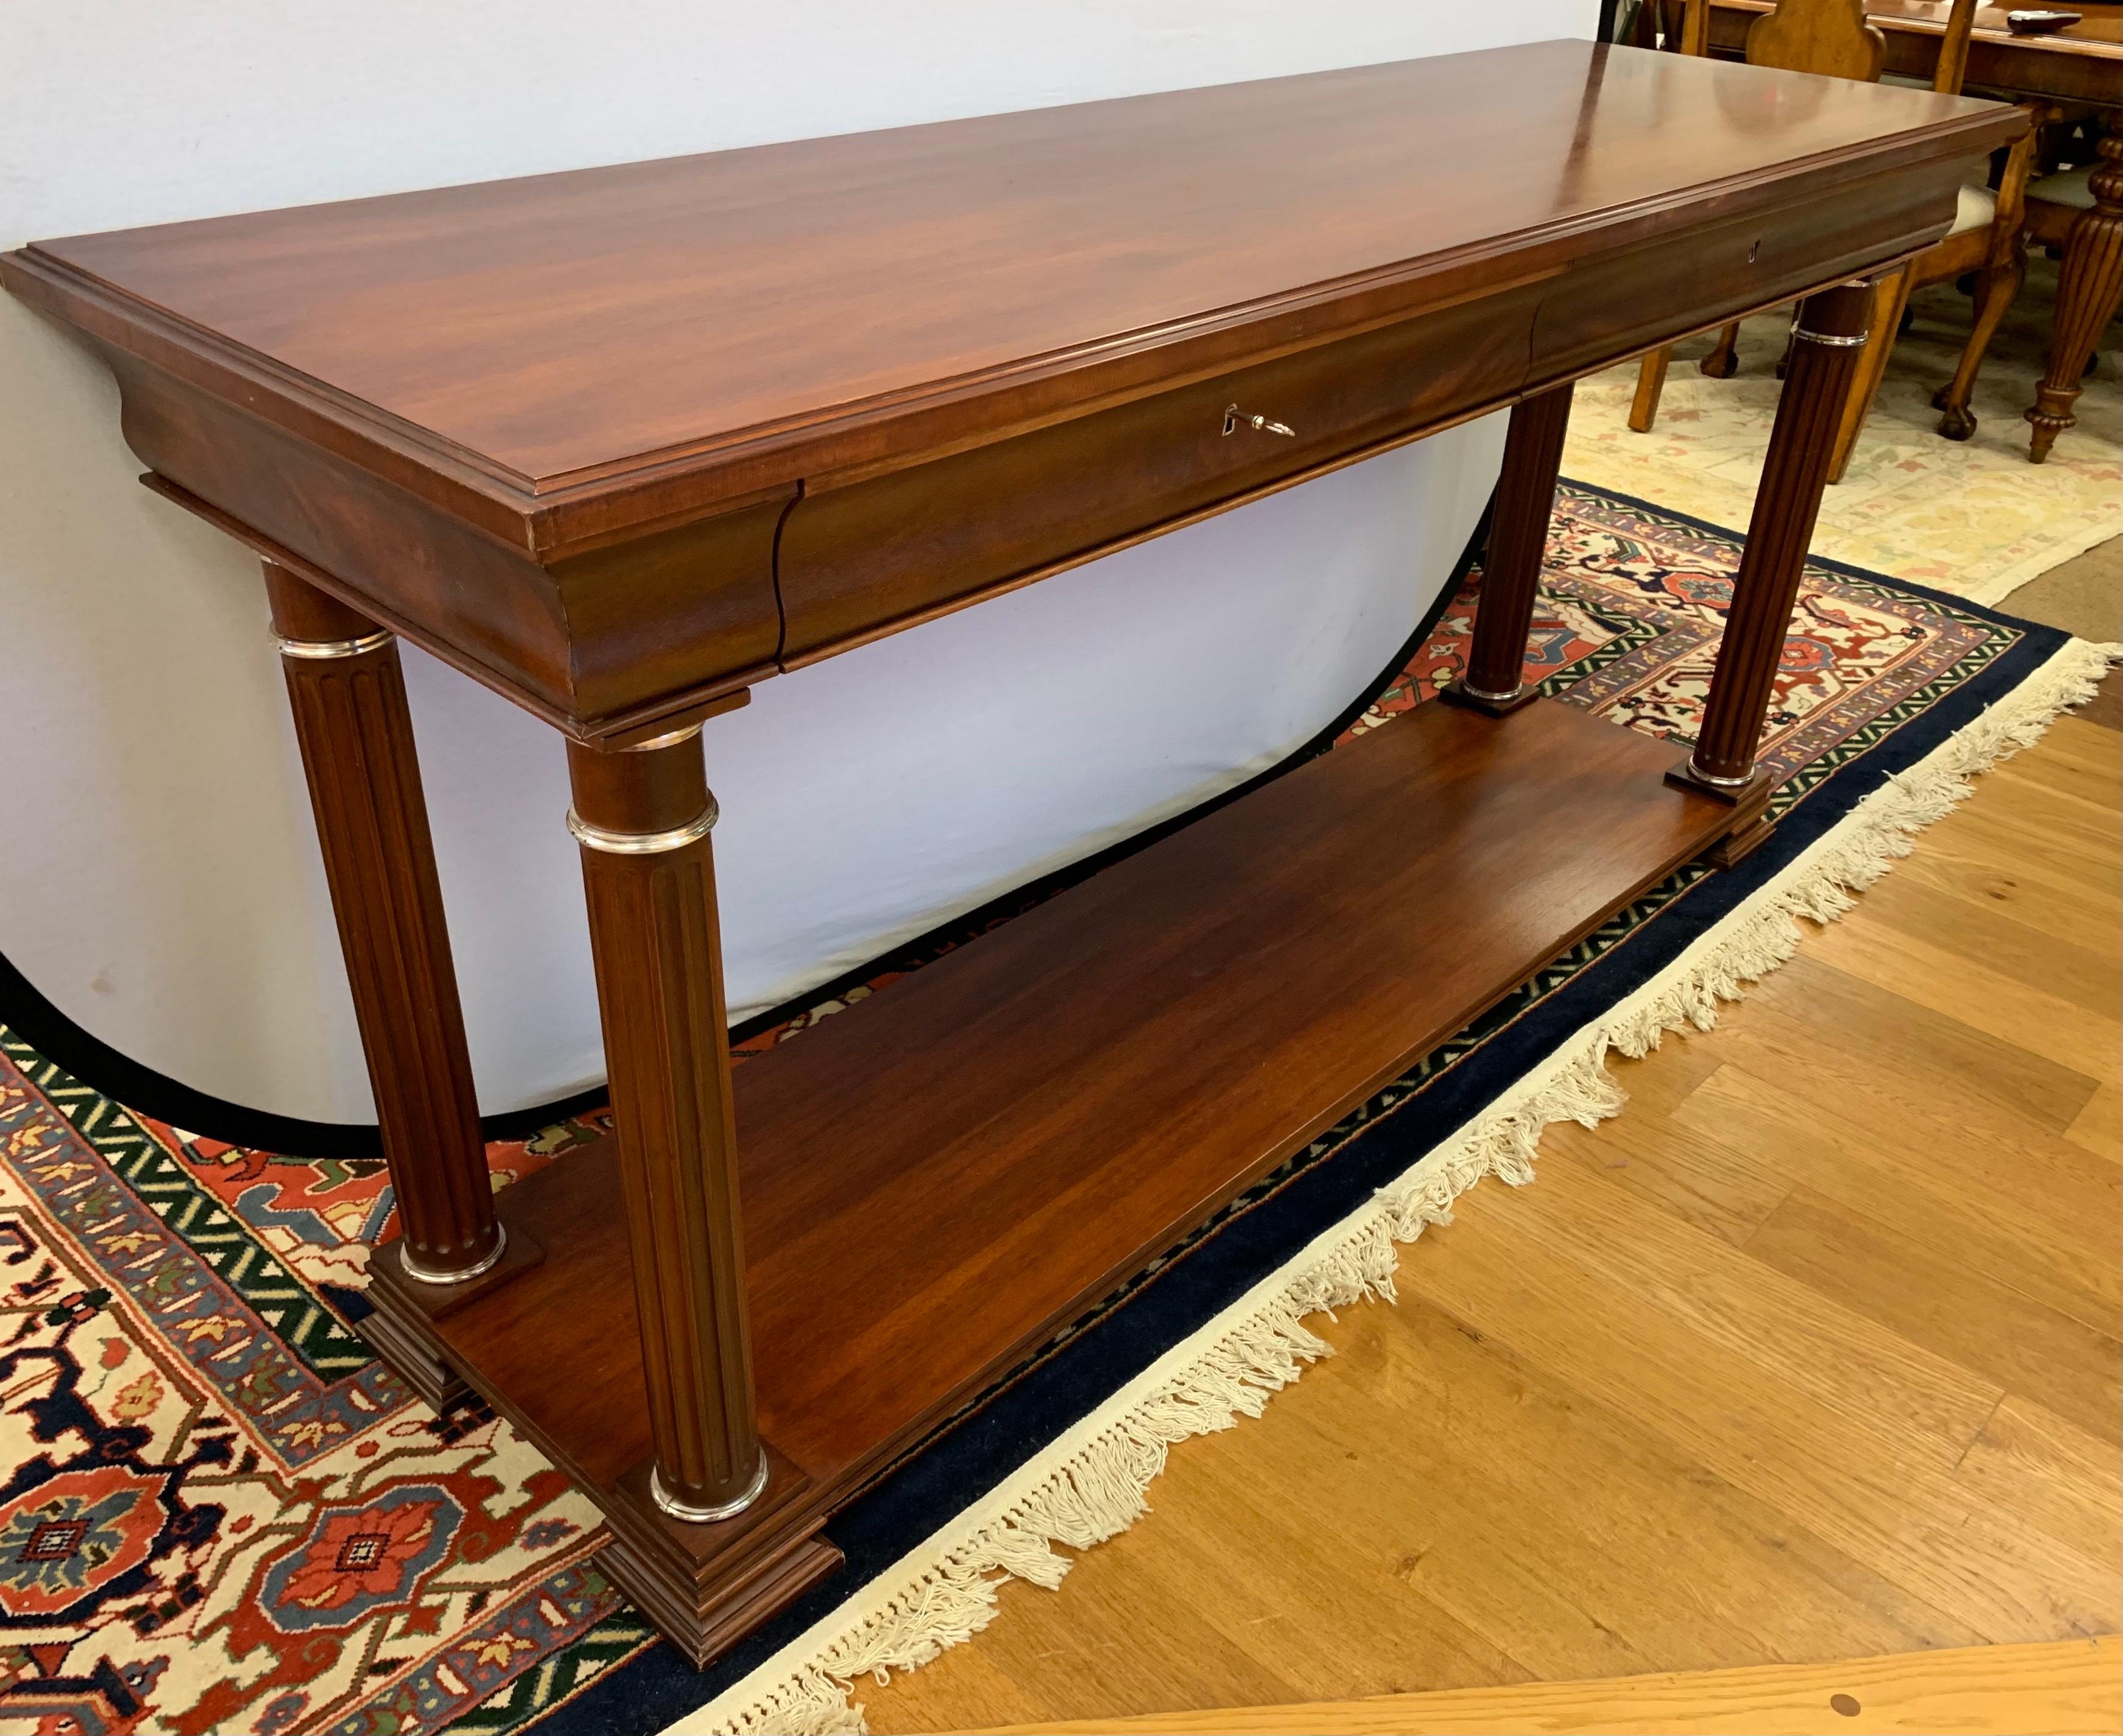 Ralph Lauren mahogany console table has two drawers with working lock and key and a bottom shelf. It rests on four fluted legs with brass accents. Marked inside drawer.